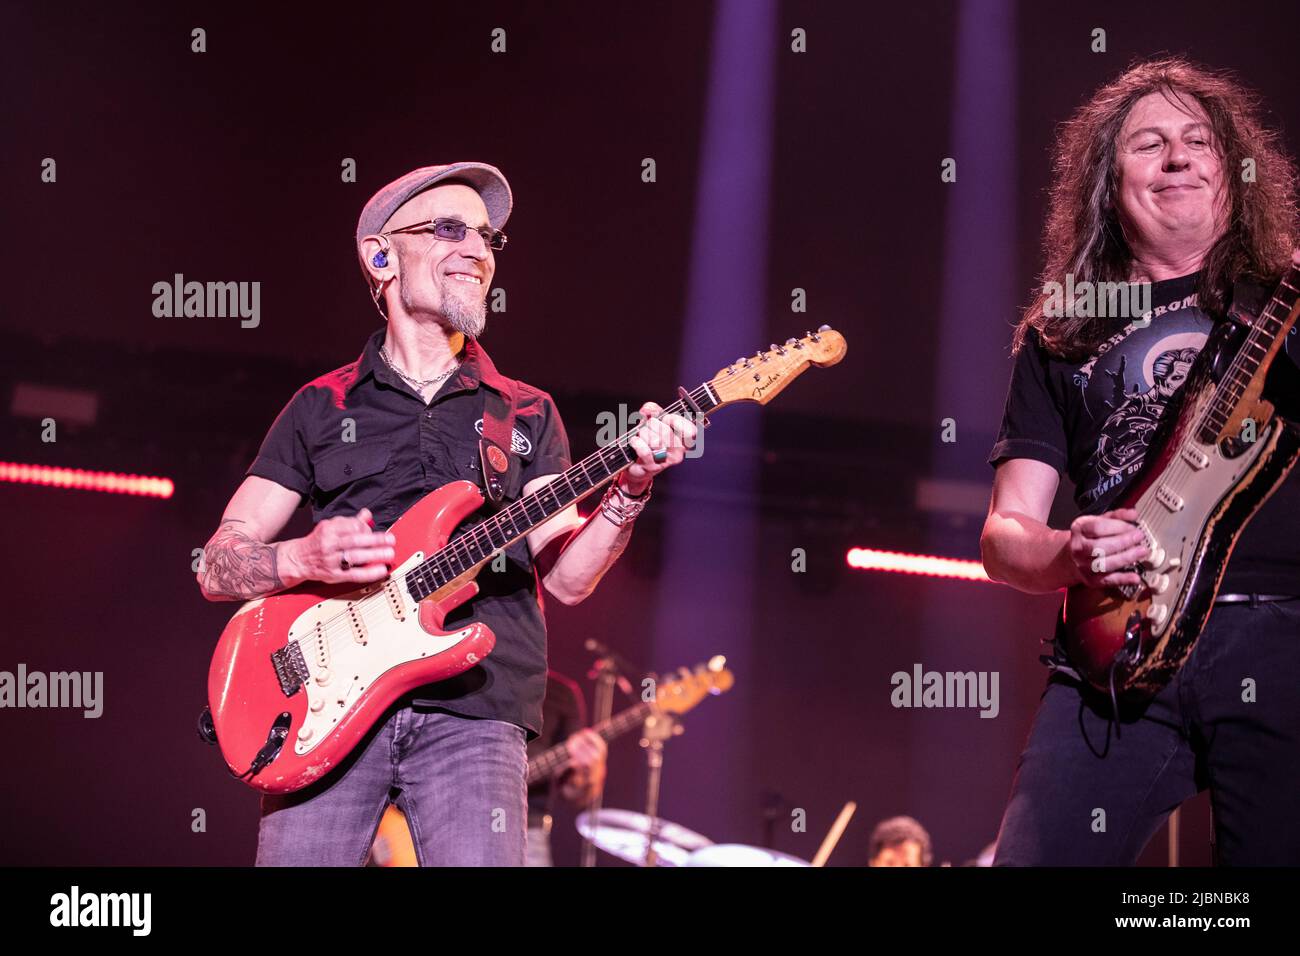 Barcelona, Spain. 2022.06.03. Fito & Los Fitipaldis band perform on stage during Cada vez cadáver Tour at Palau Sant Jordi on June 03, 2022 in Barcelona, Spain. Stock Photo